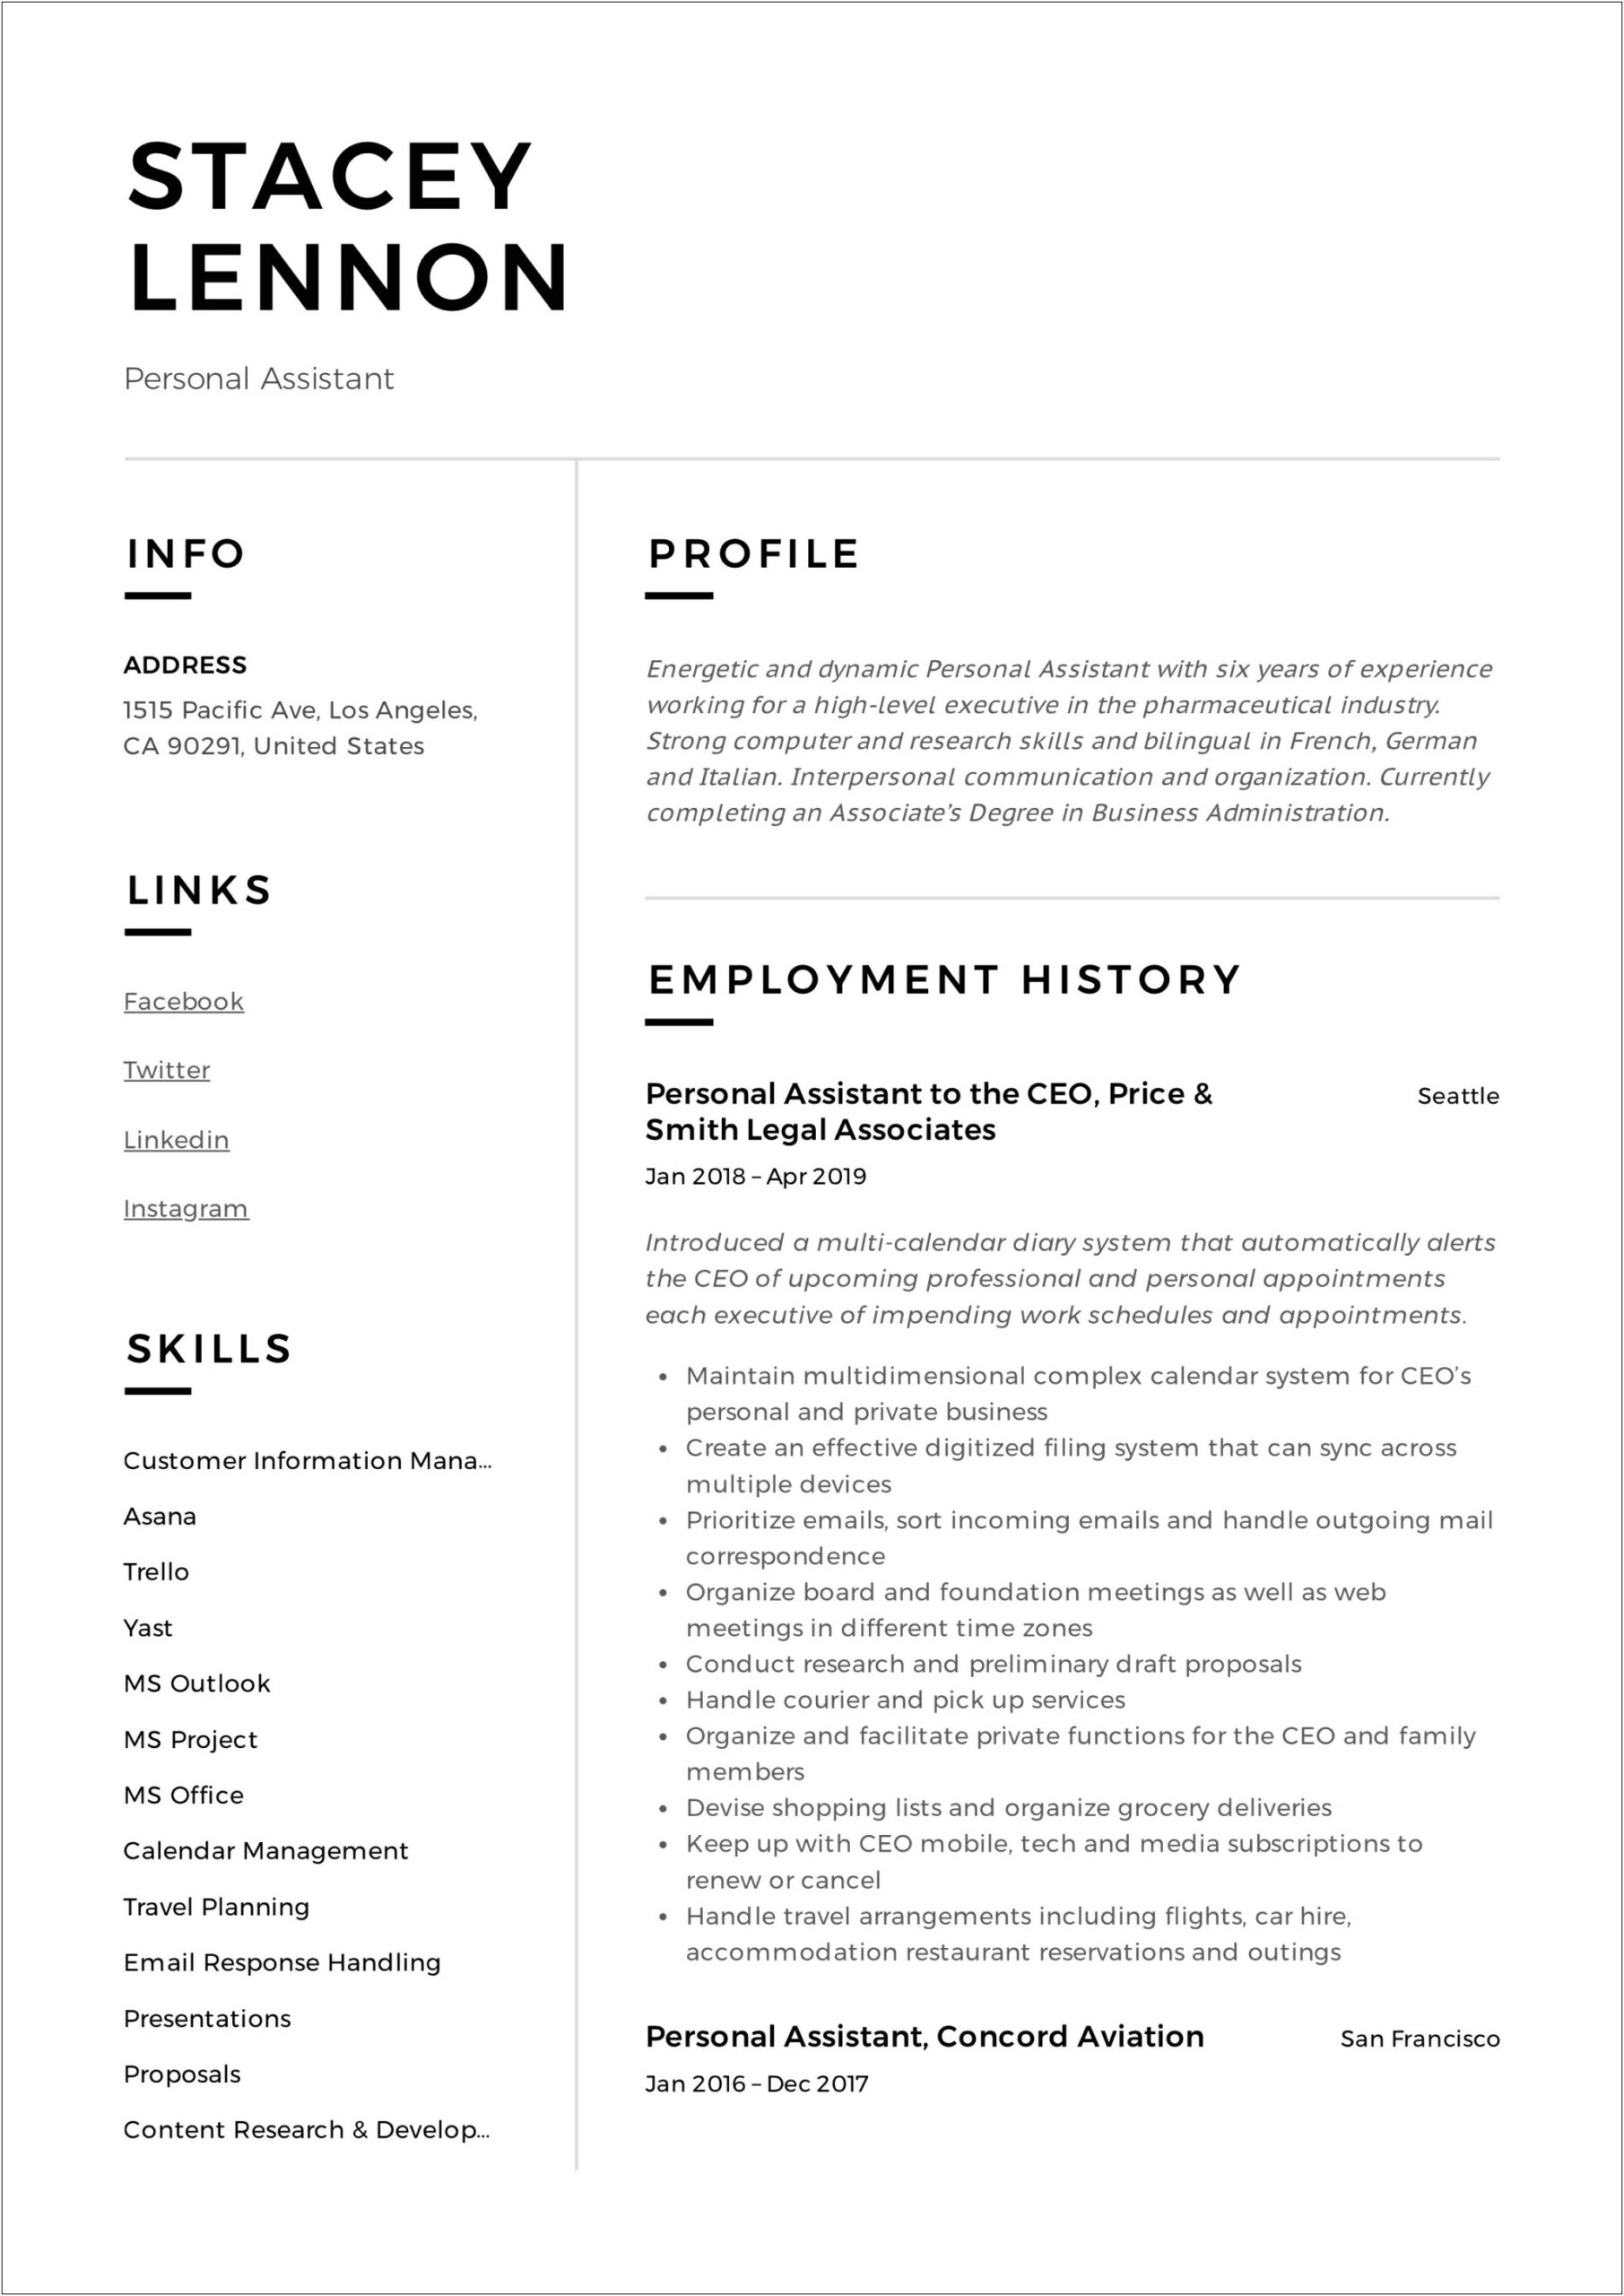 Personal Assistant Jobs Resume Objective